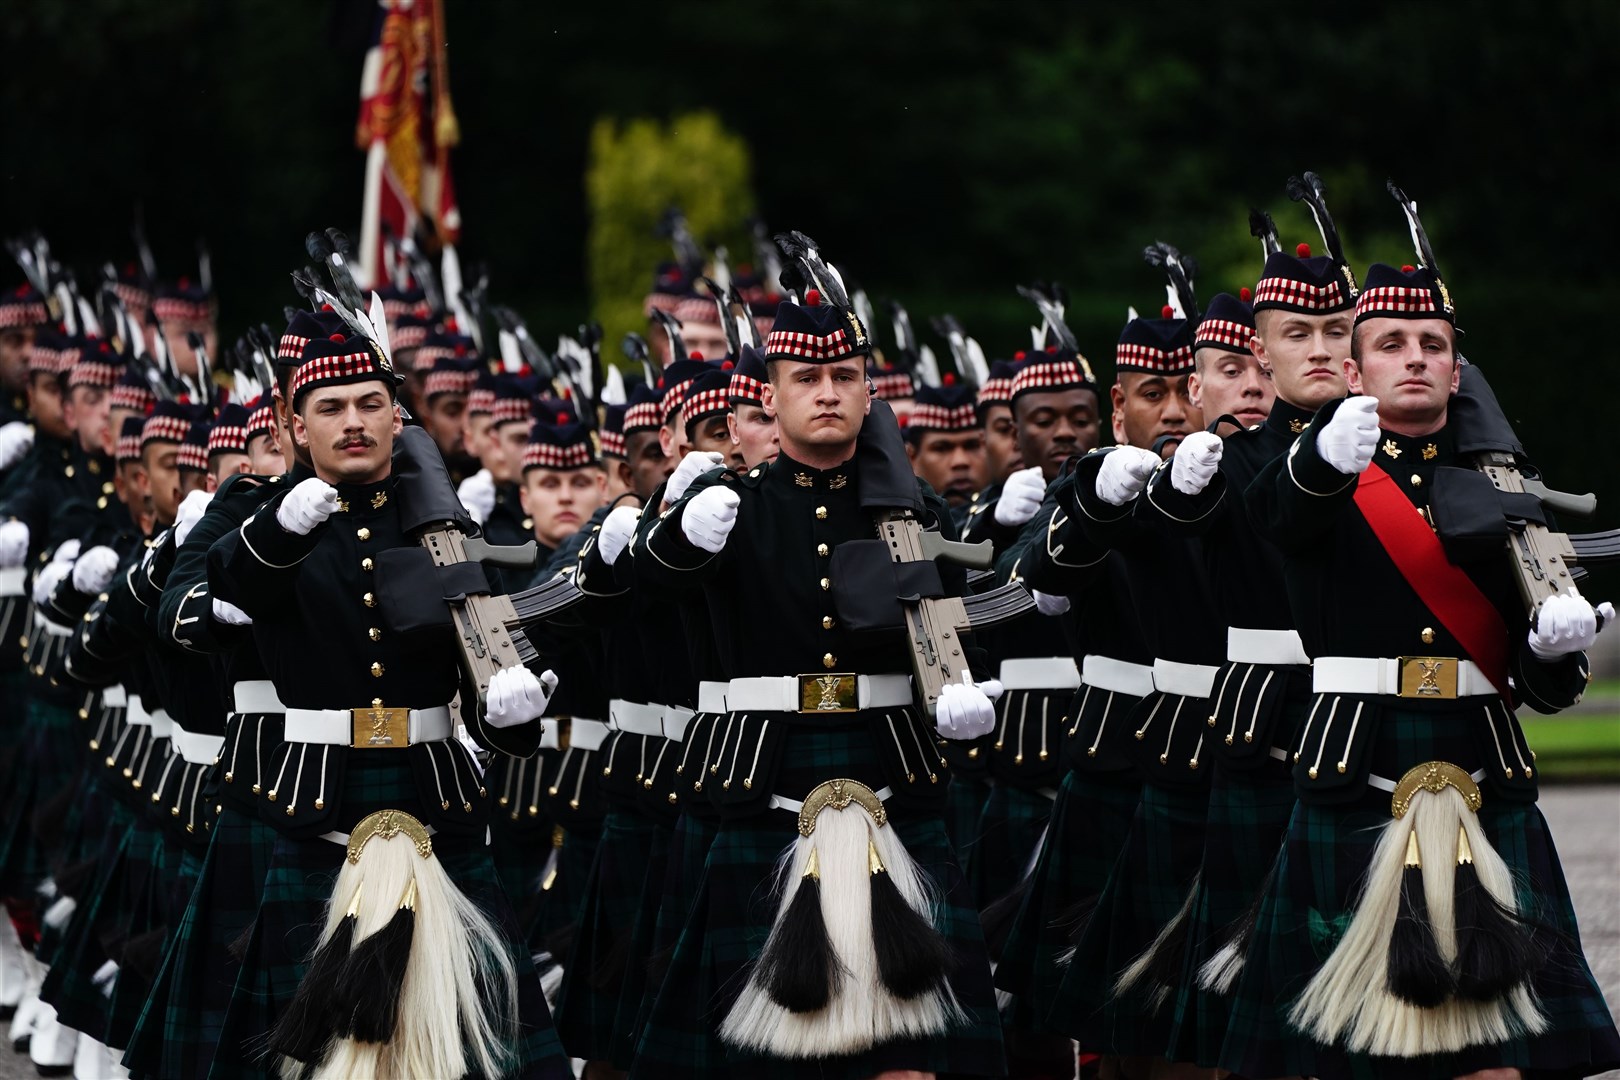 The Royal Archers arriving at the Palace of Holyroodhouse (Aaron Chown/PA)